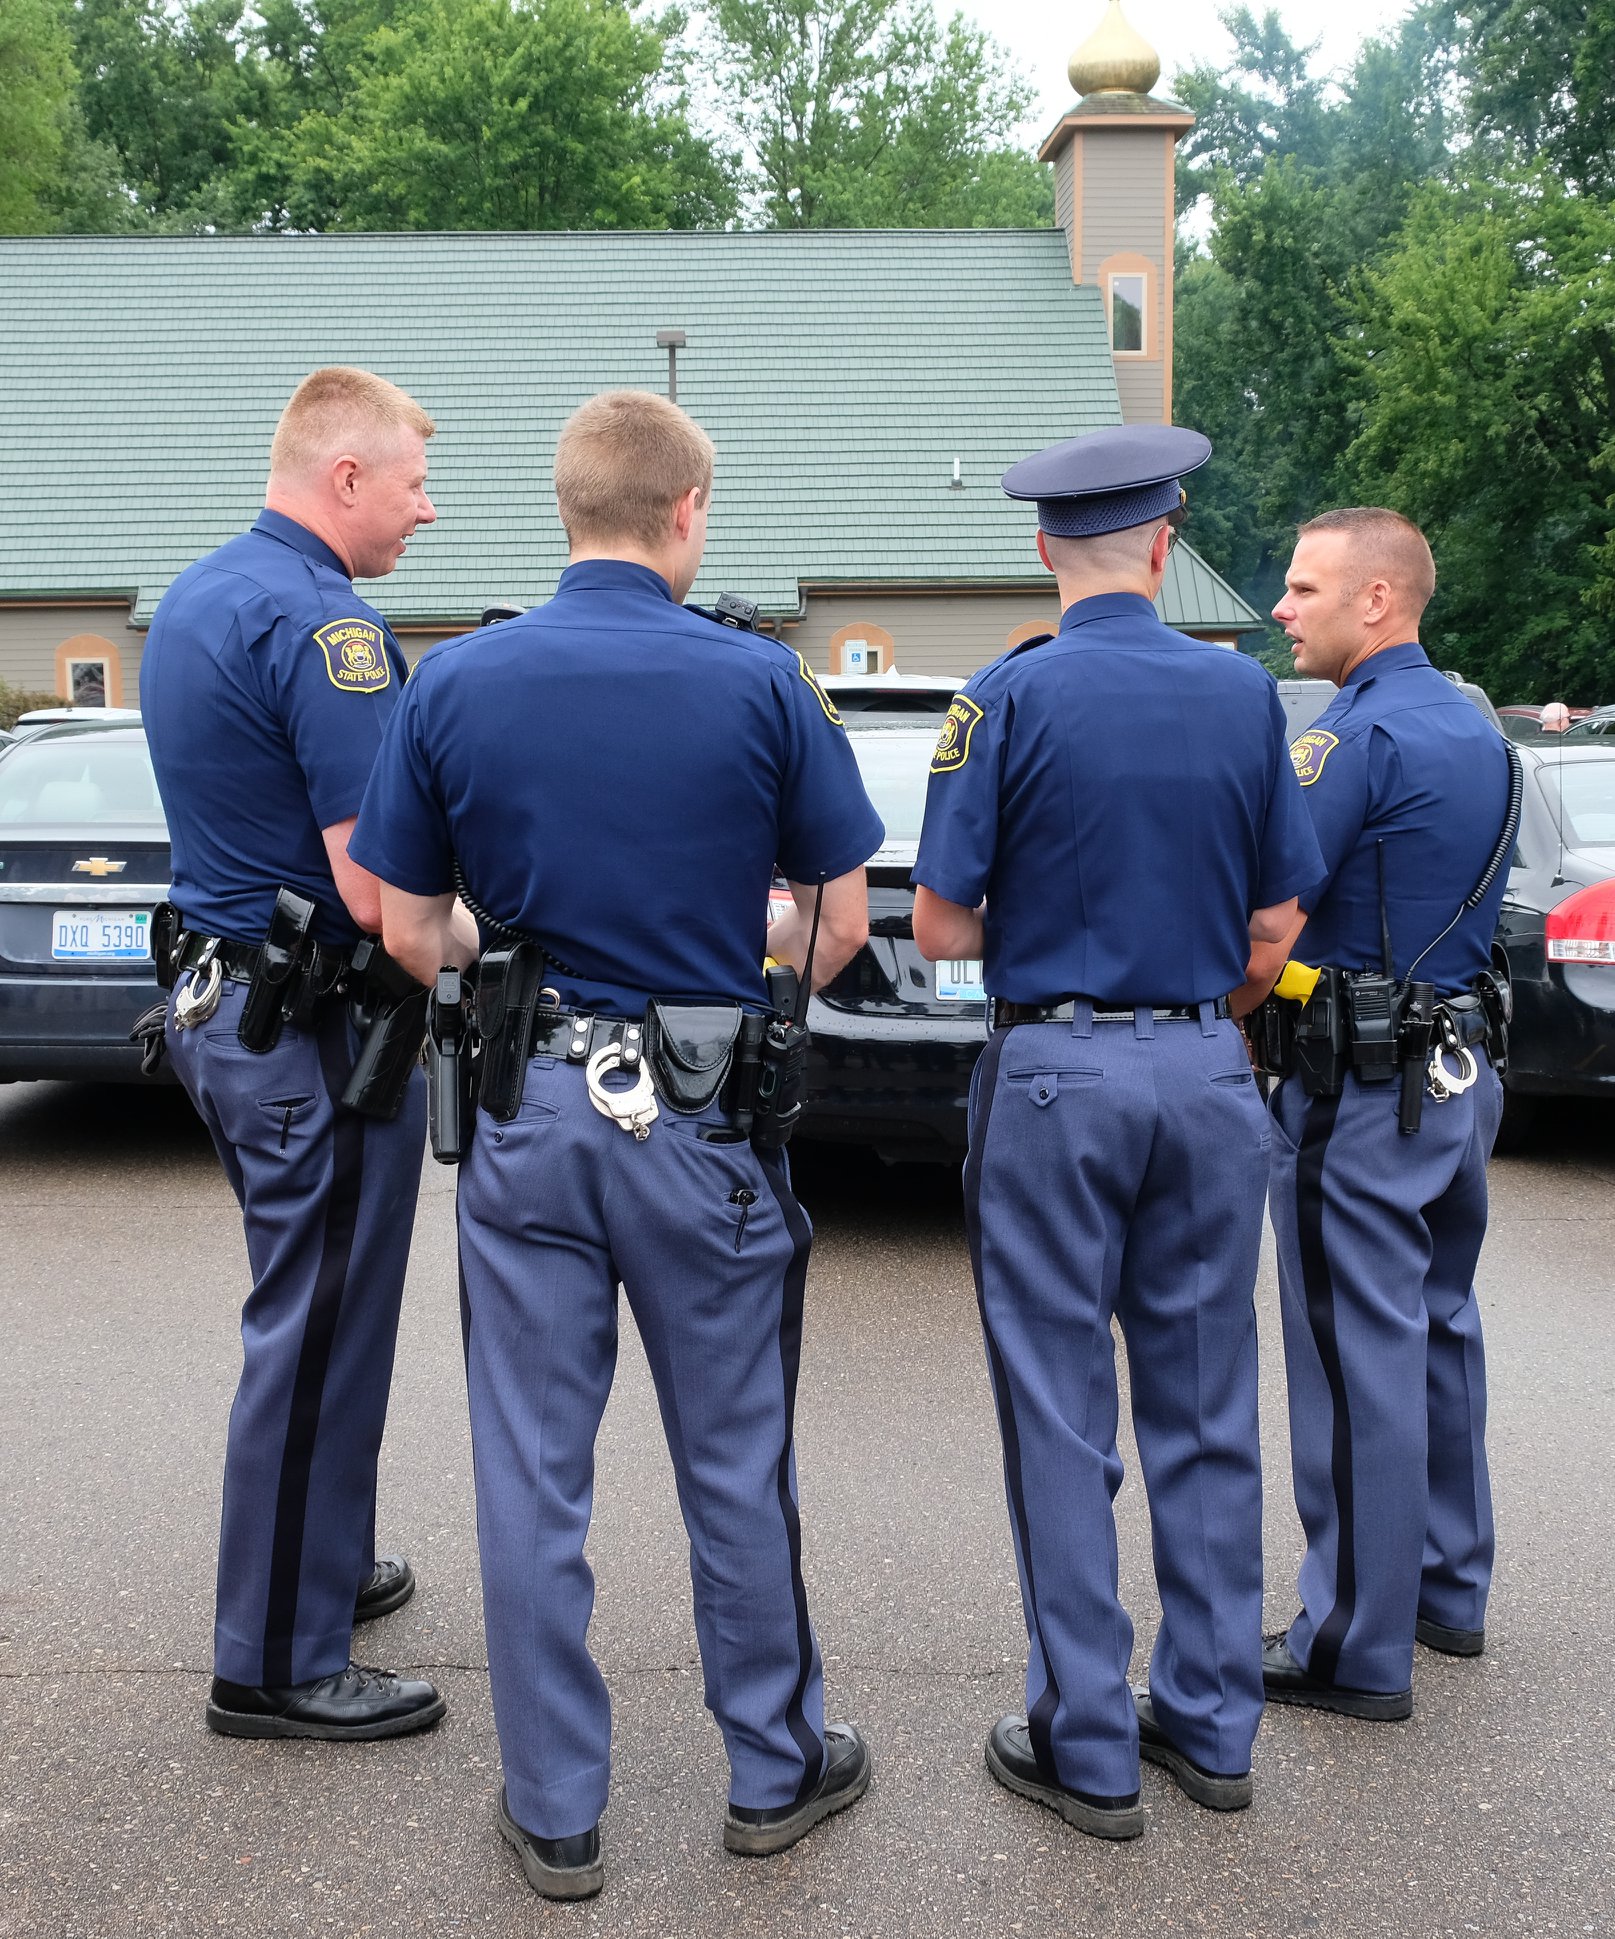  four state troopers standing together in church parking lot 